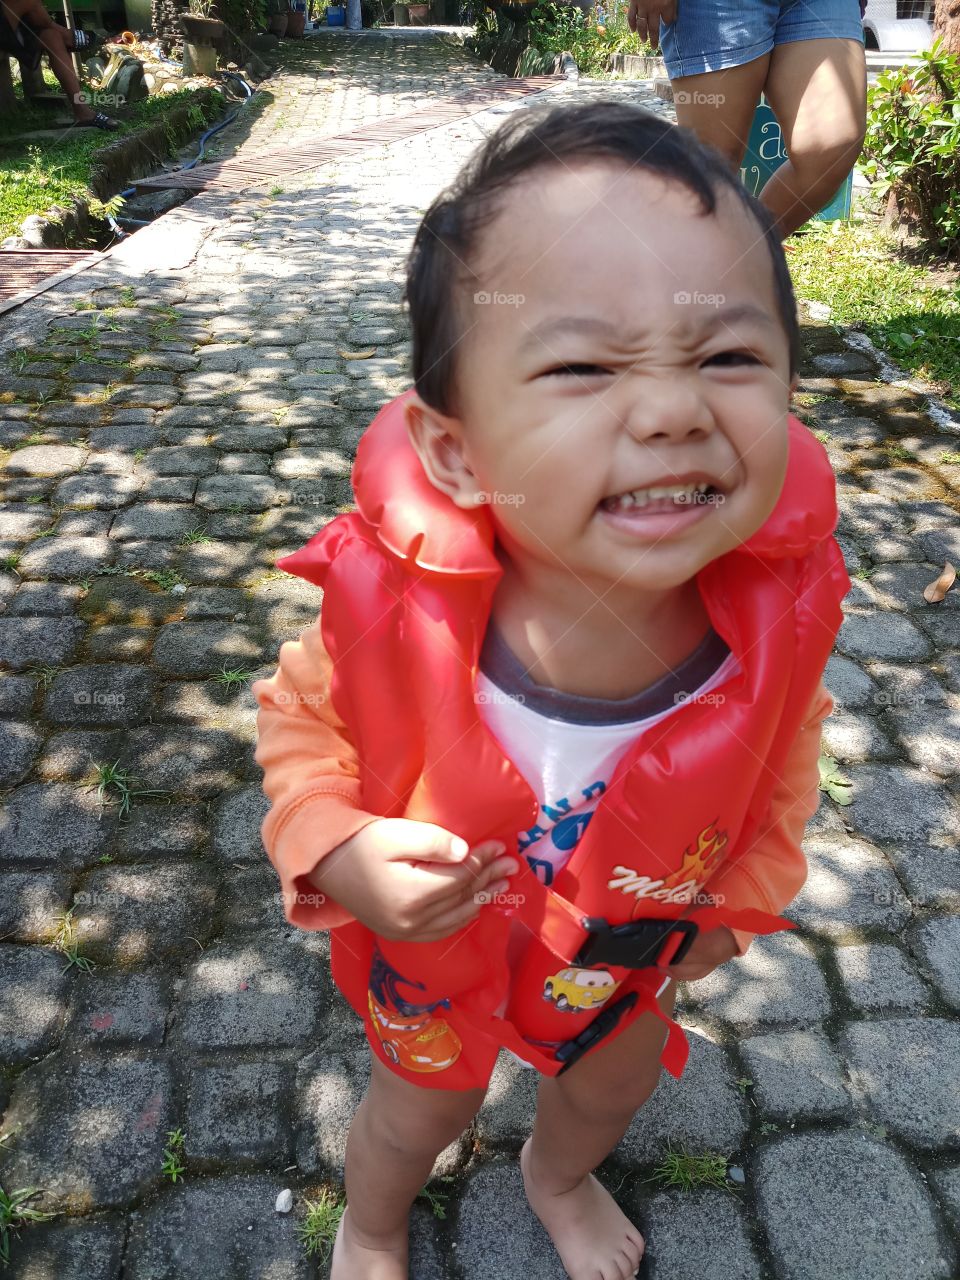 a toddler excited to go on swimming.